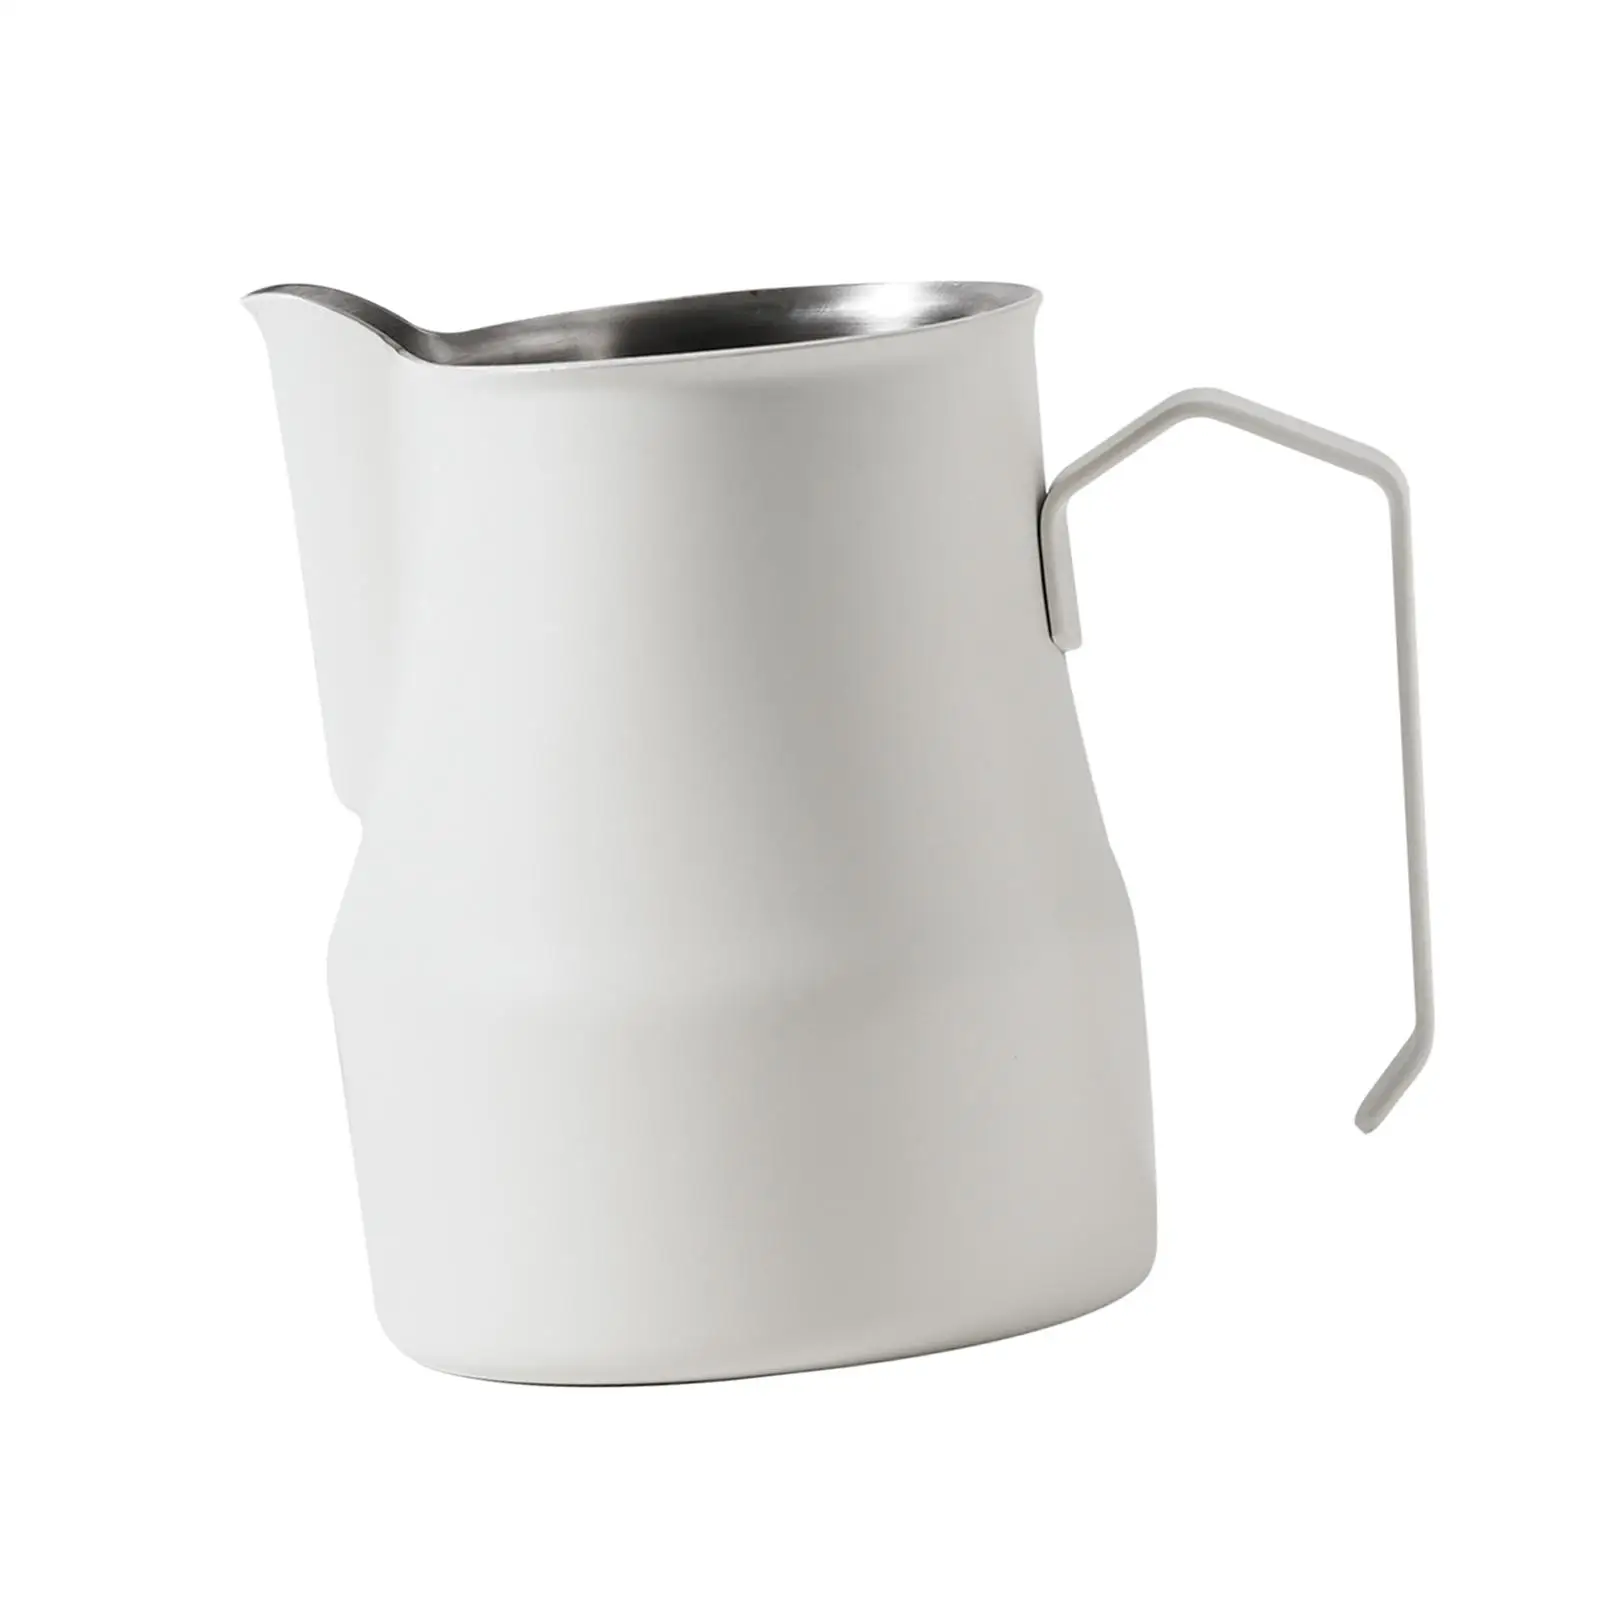 Milk Frothing Pitcher Barista Tool Espresso Steaming Pitcher for Kitchen Bar